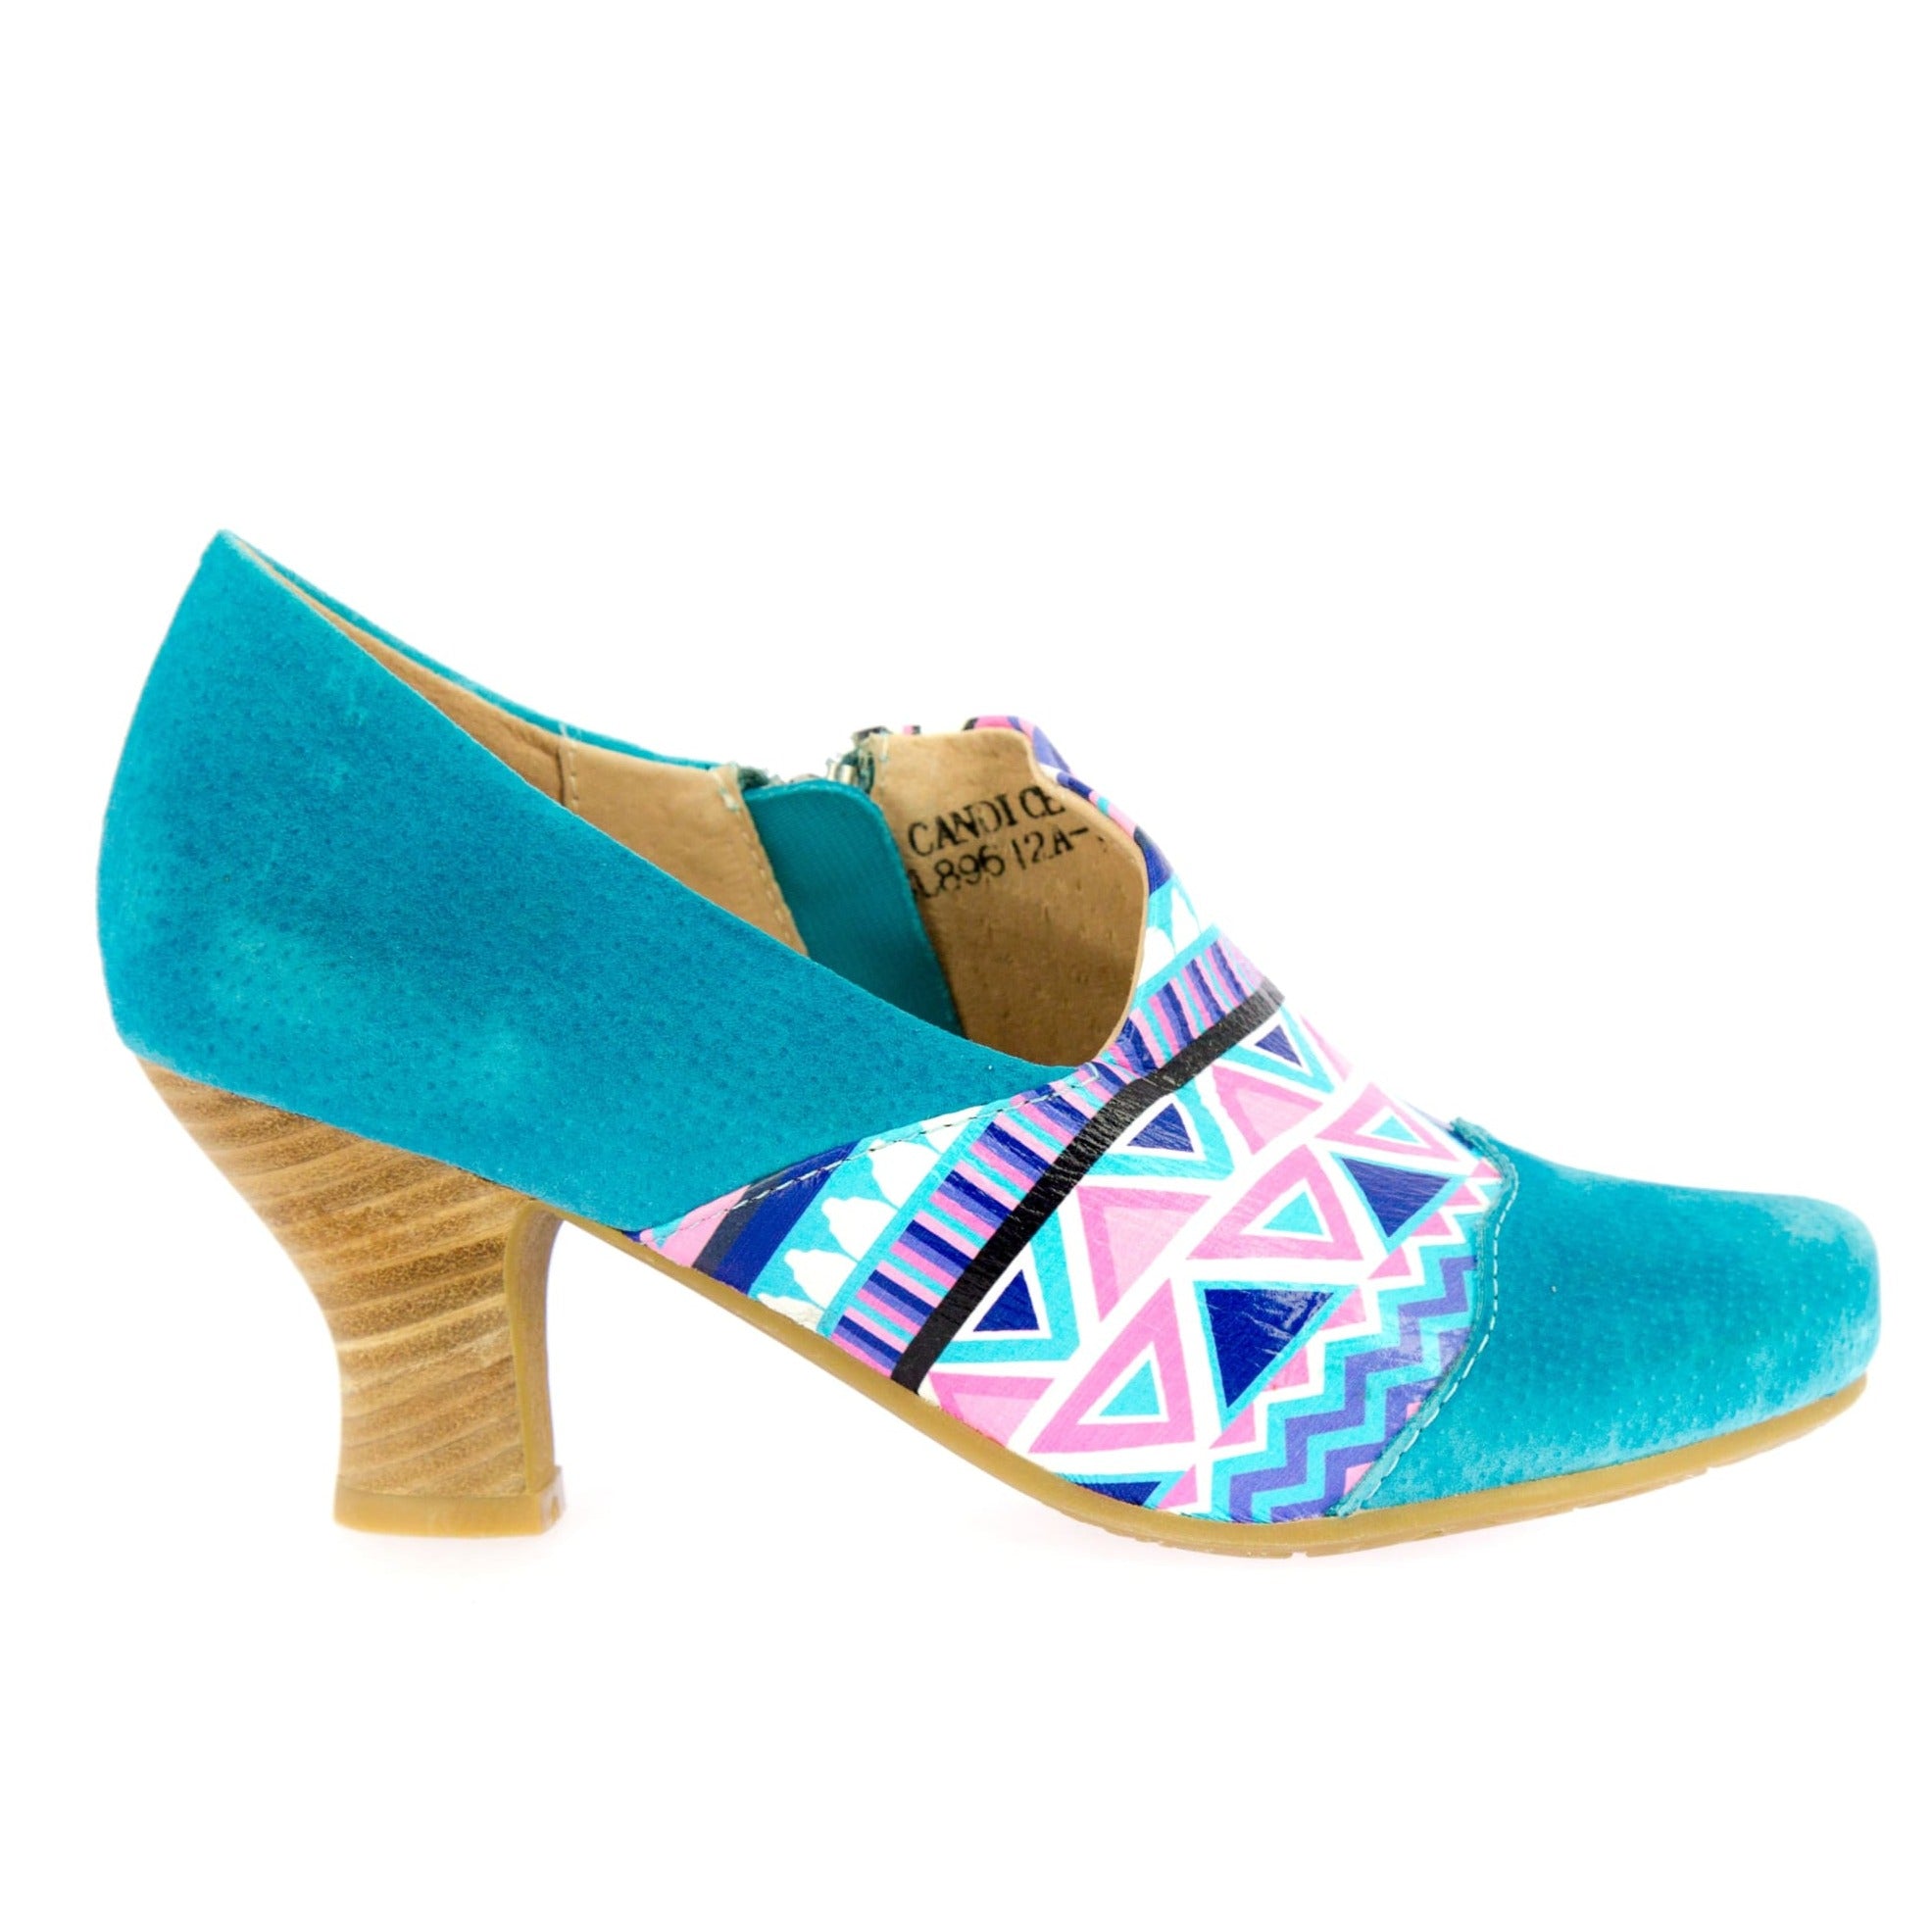 Chaussures CANDICE 078 - 35 / Turquoise - Mocassin